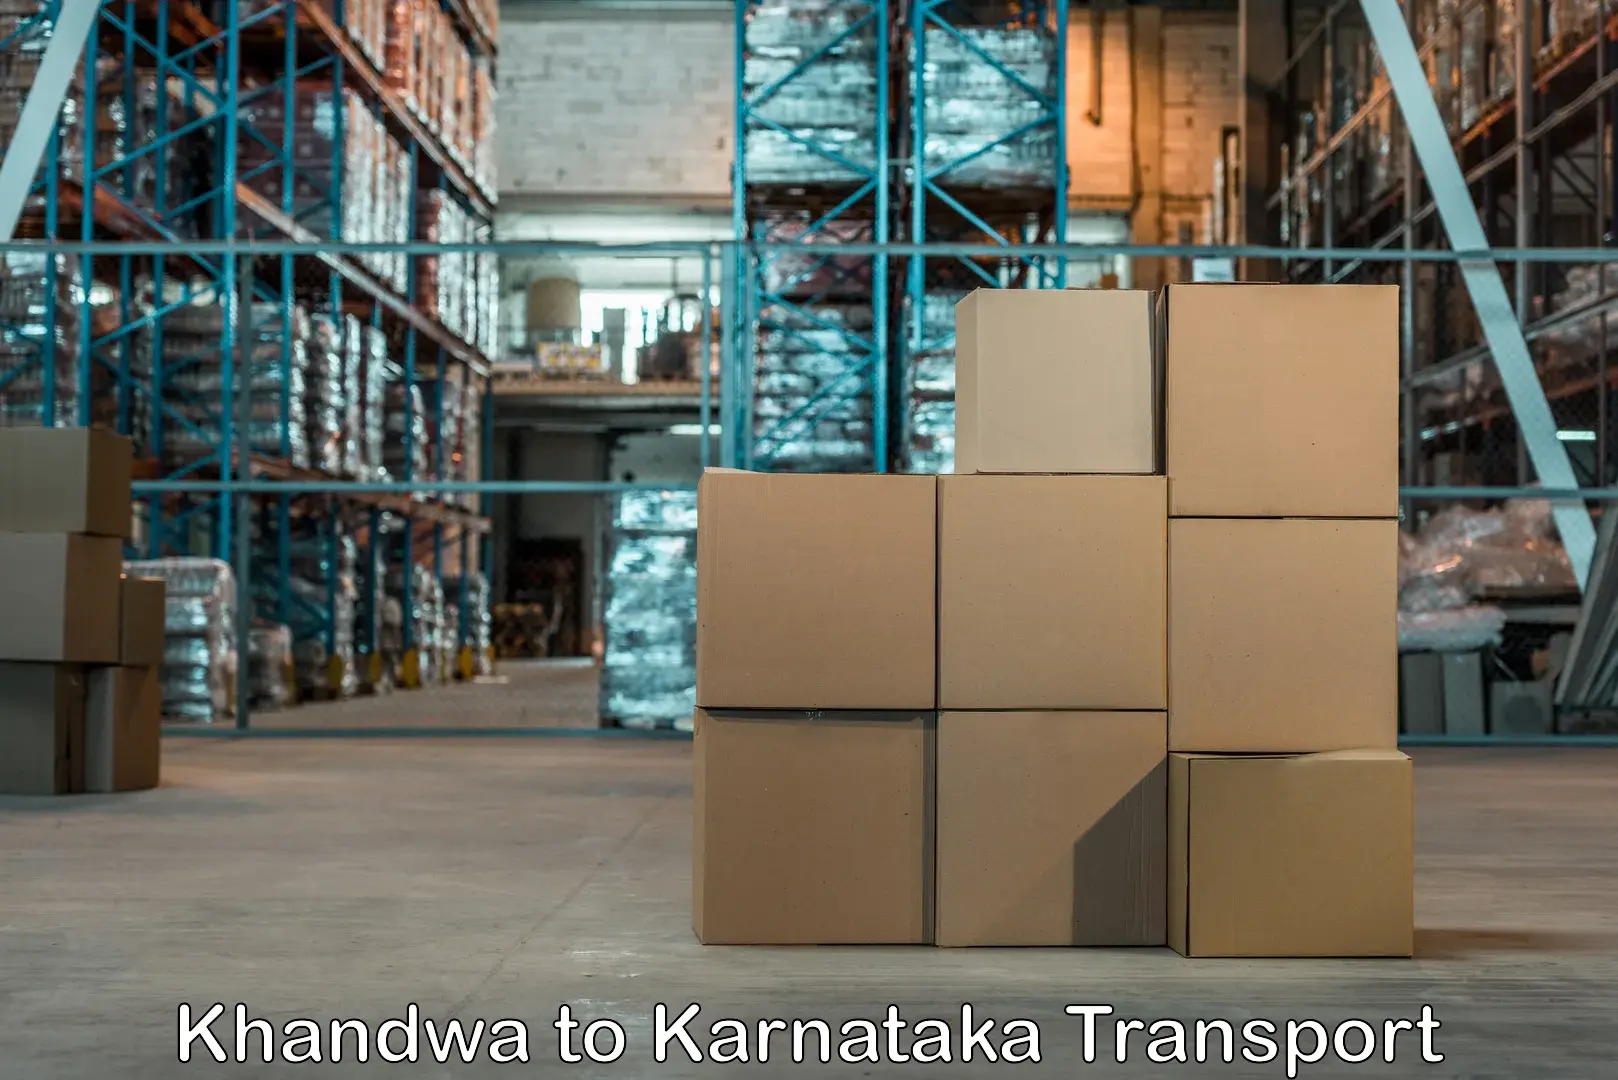 Container transport service Khandwa to Mysore